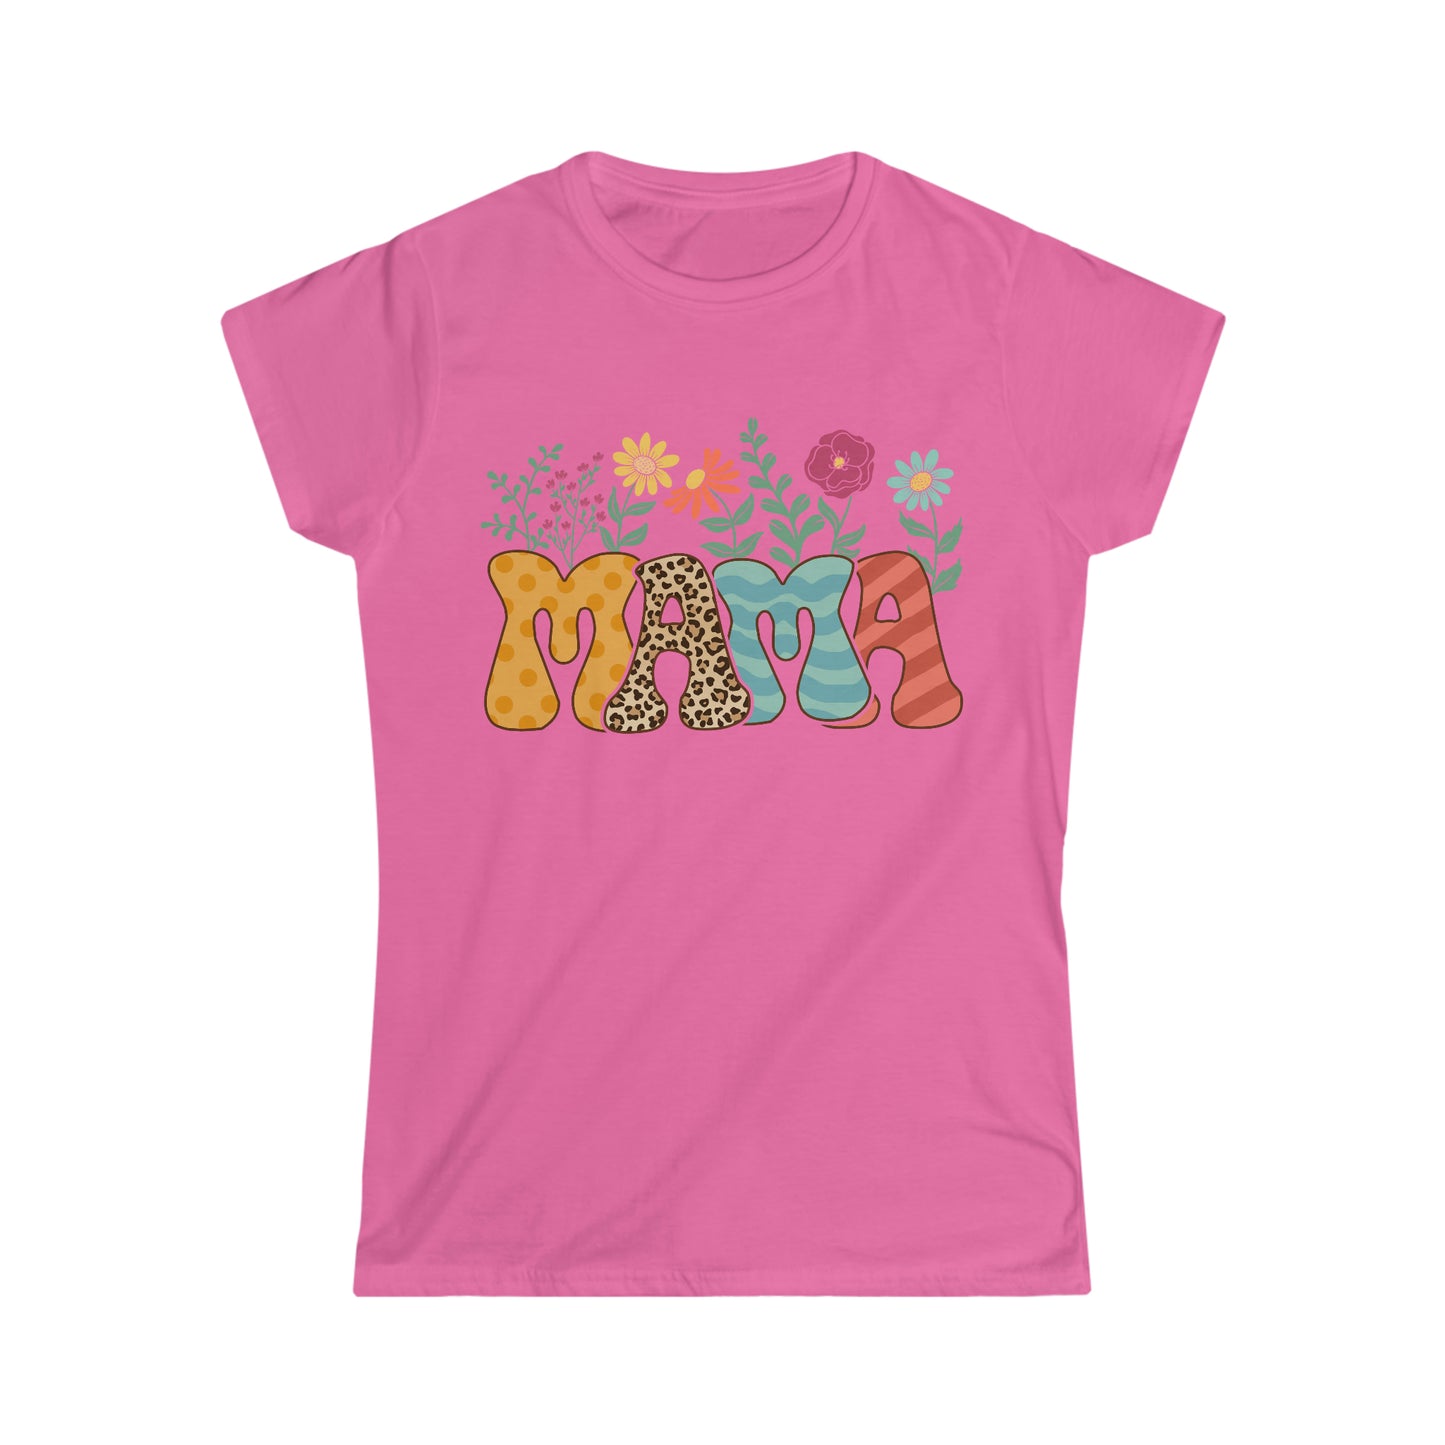 Mother's Day Gift Idea: Women's Softstyle Tee Mama T-Shirt